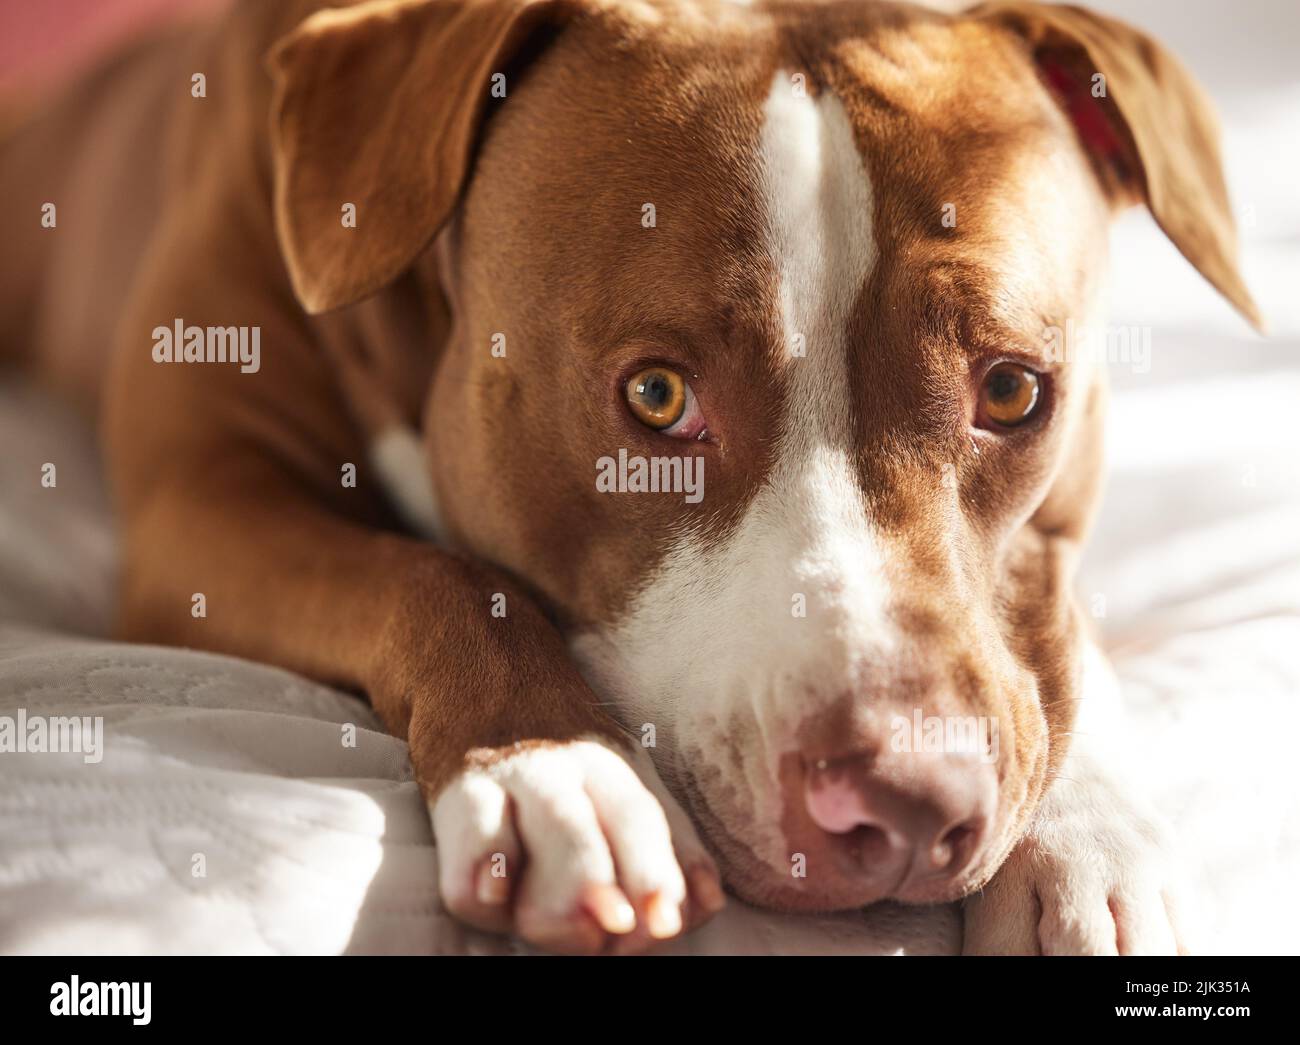 Hey, where are we going. Portrait of an adorably sweet dog relaxing on a bed at home. Stock Photo